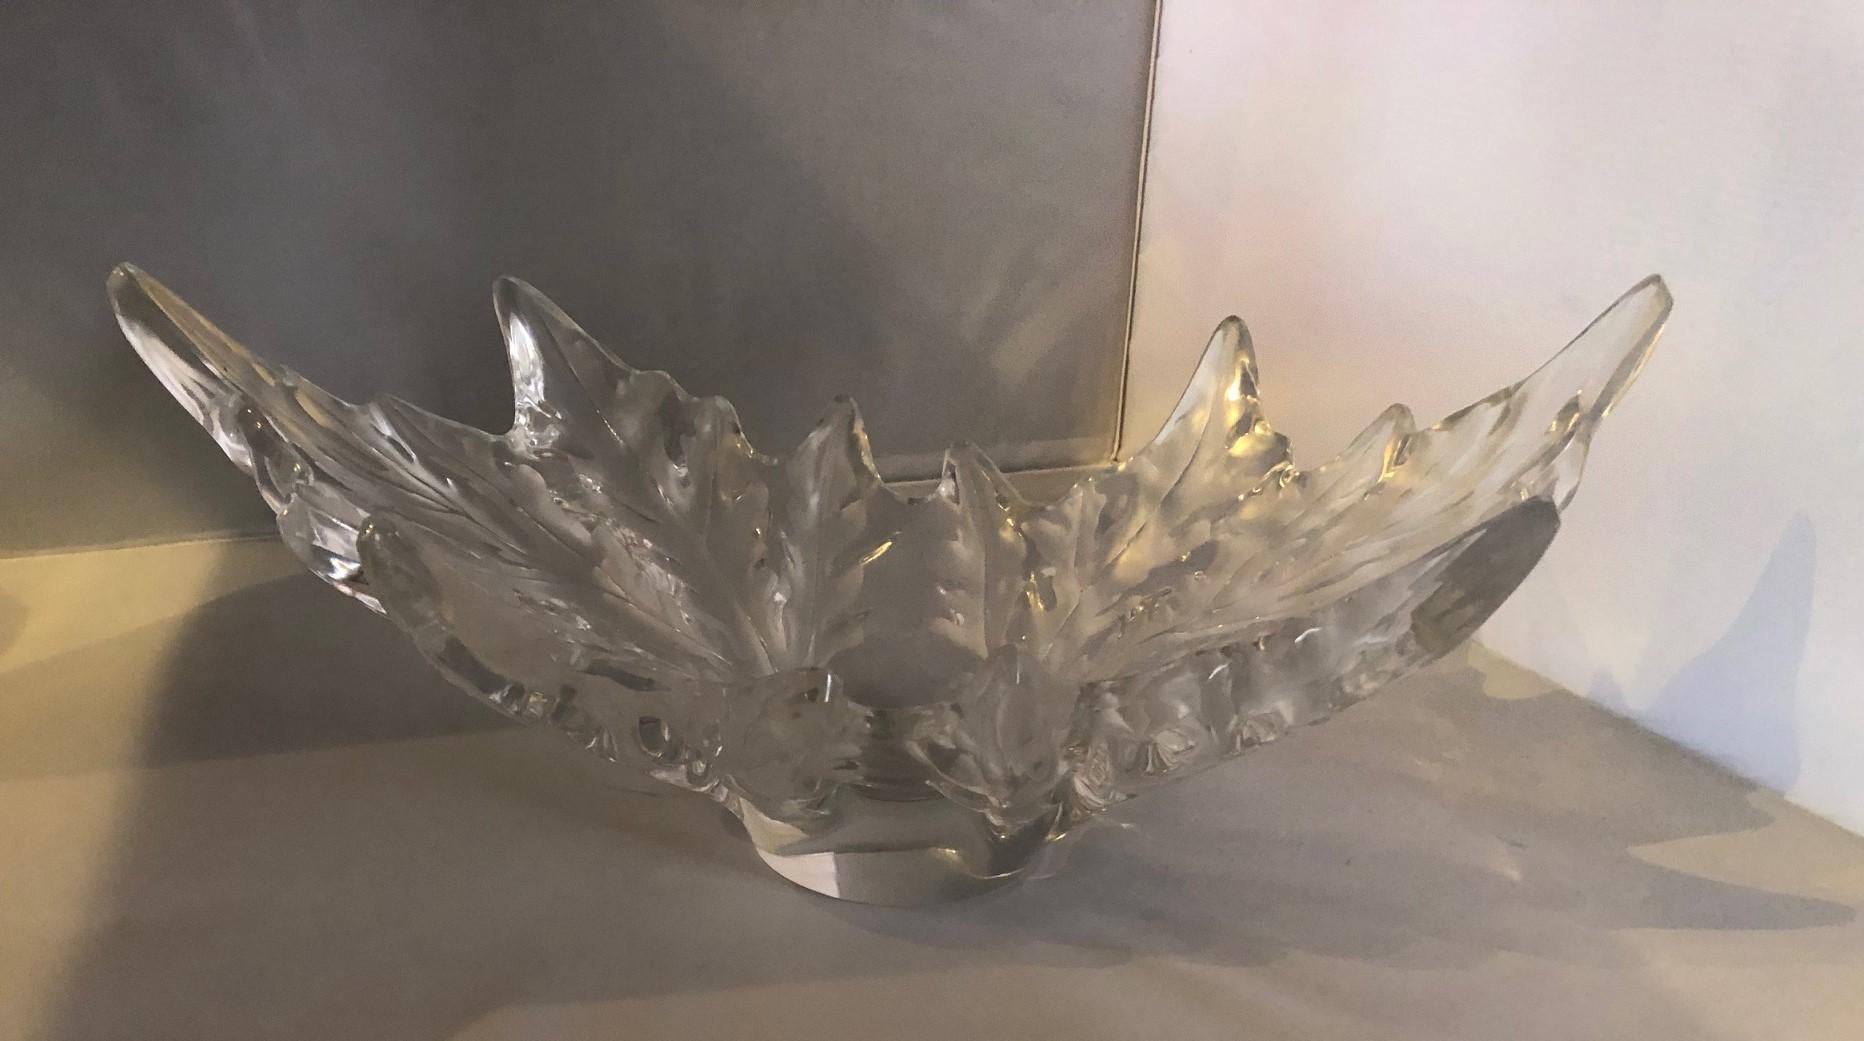 An impressive and elegant Champs-Élysées lead crystal centerpiece bowl, designed in 1951 by Marc Lalique for Lalique, circa 1990s. The spectacular rows of trees lining the Champs- Élysées in Paris, France, 